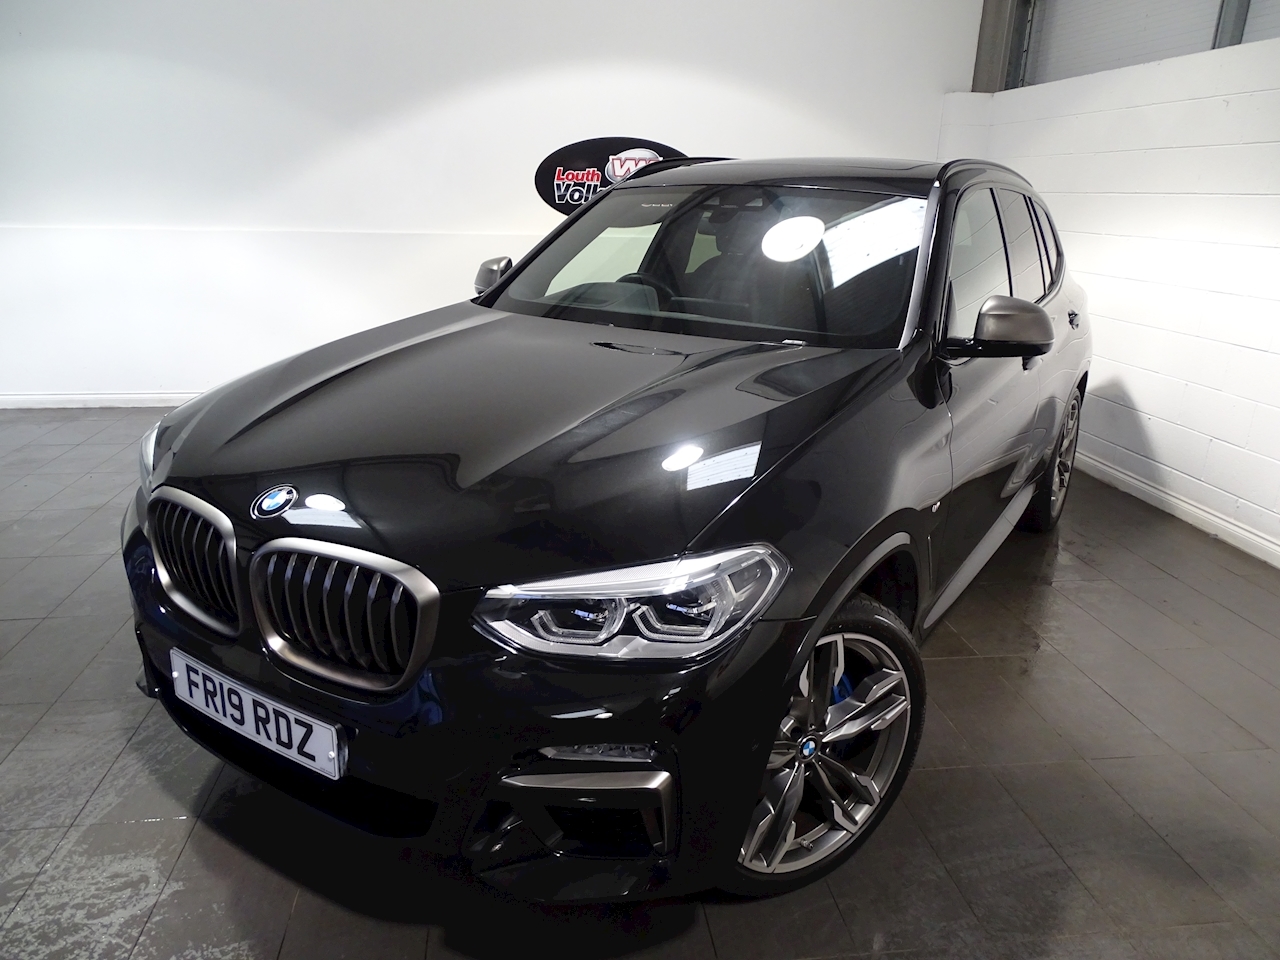 3.0 M40d SUV 5dr Diesel Auto xDrive (s/s) (326 ps)